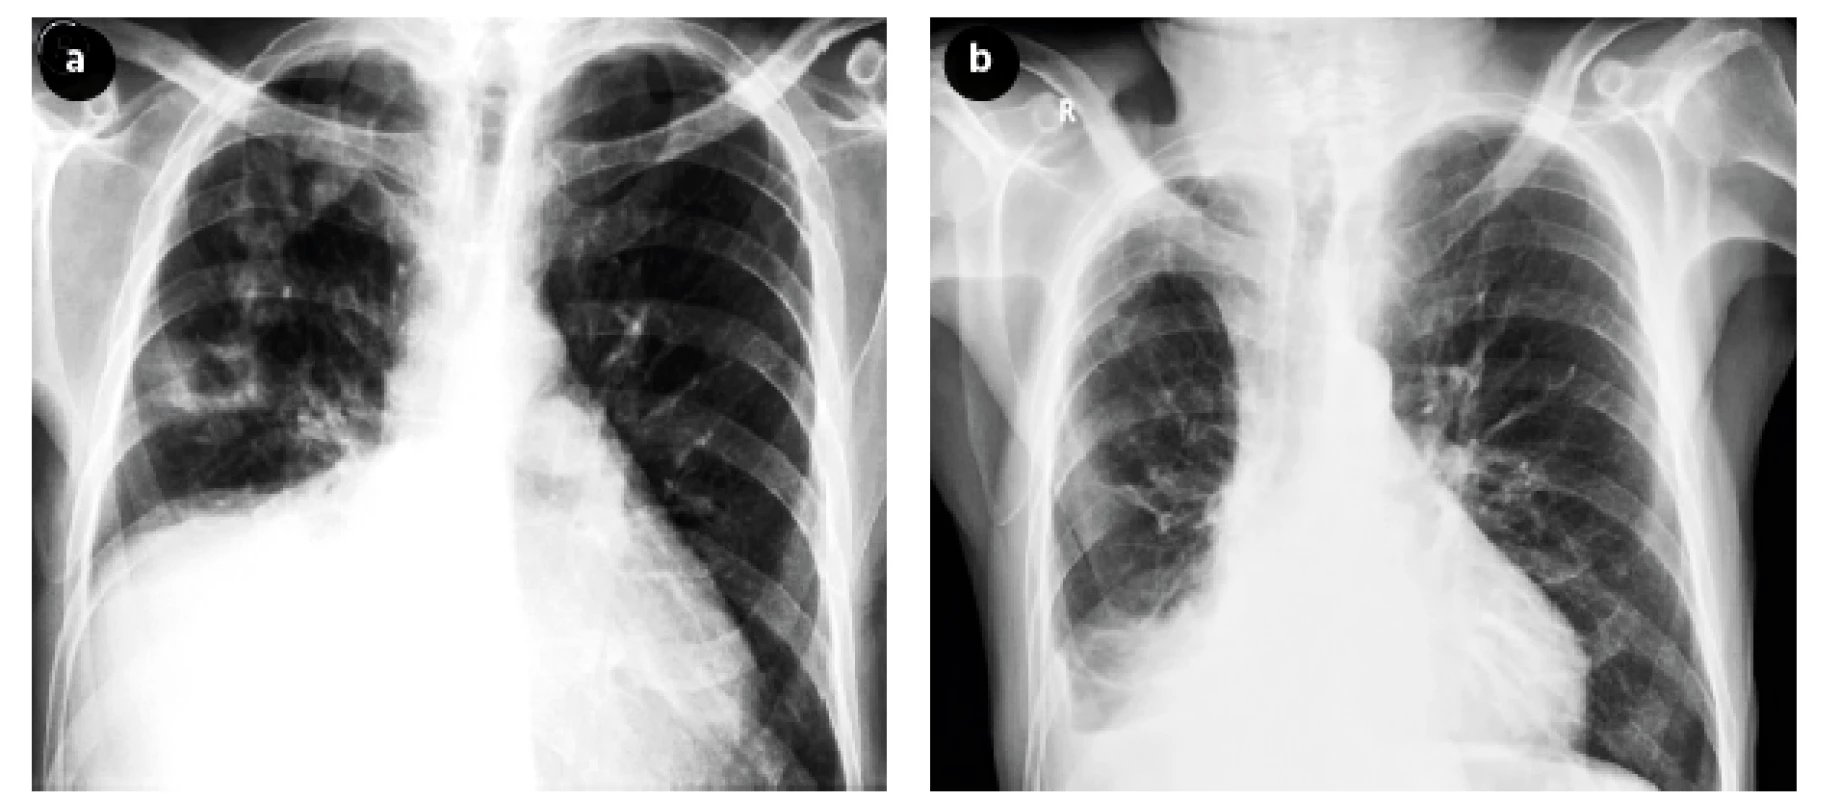 Chest X-ray before (Figure 3a) and after (Figure 3b) treatment